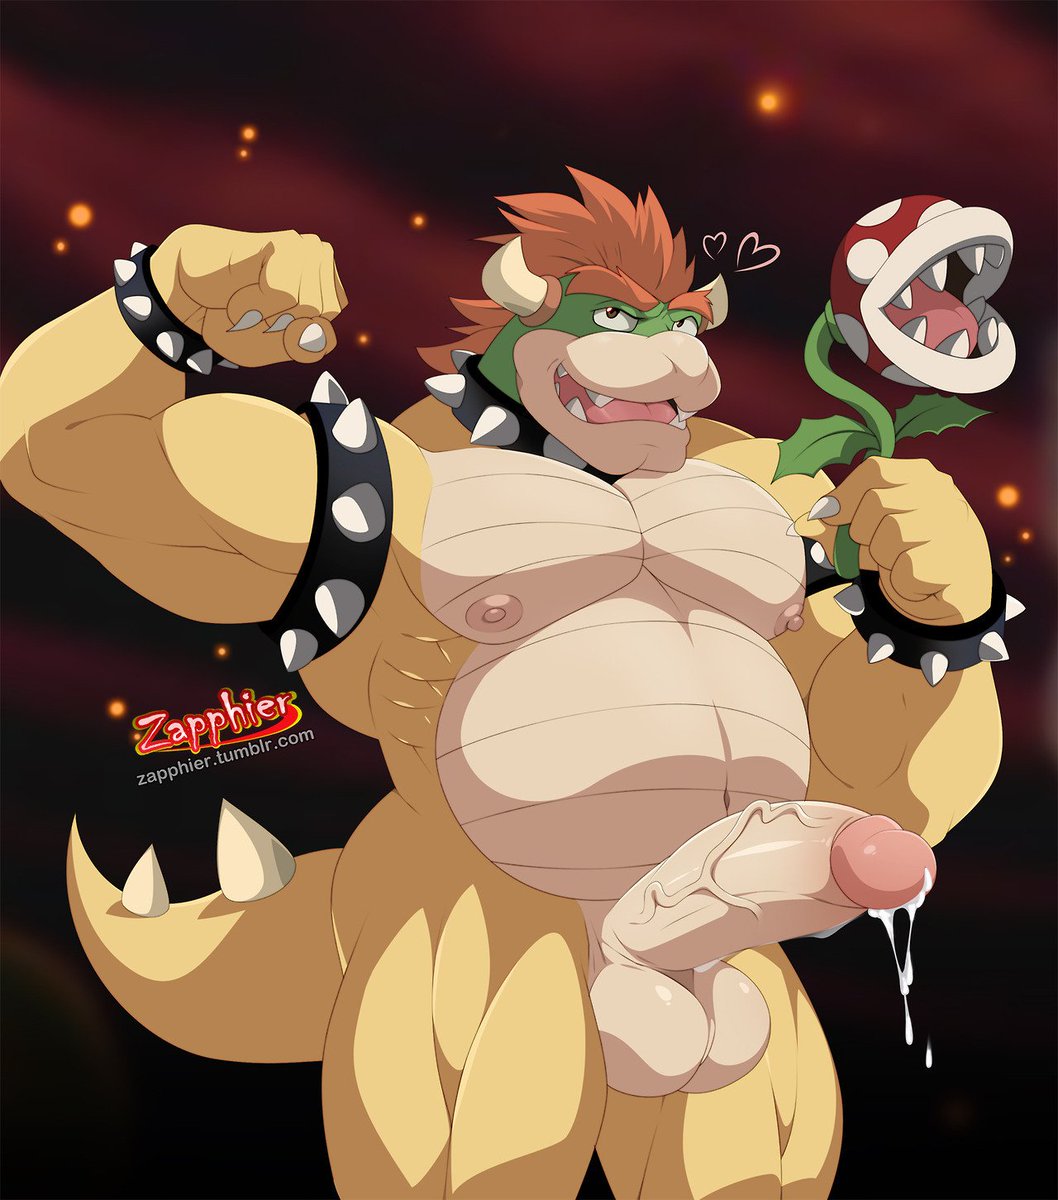 on Twitter photo 2018-12-22 00:21:35 Bowser is a bad guy, but a very good a...